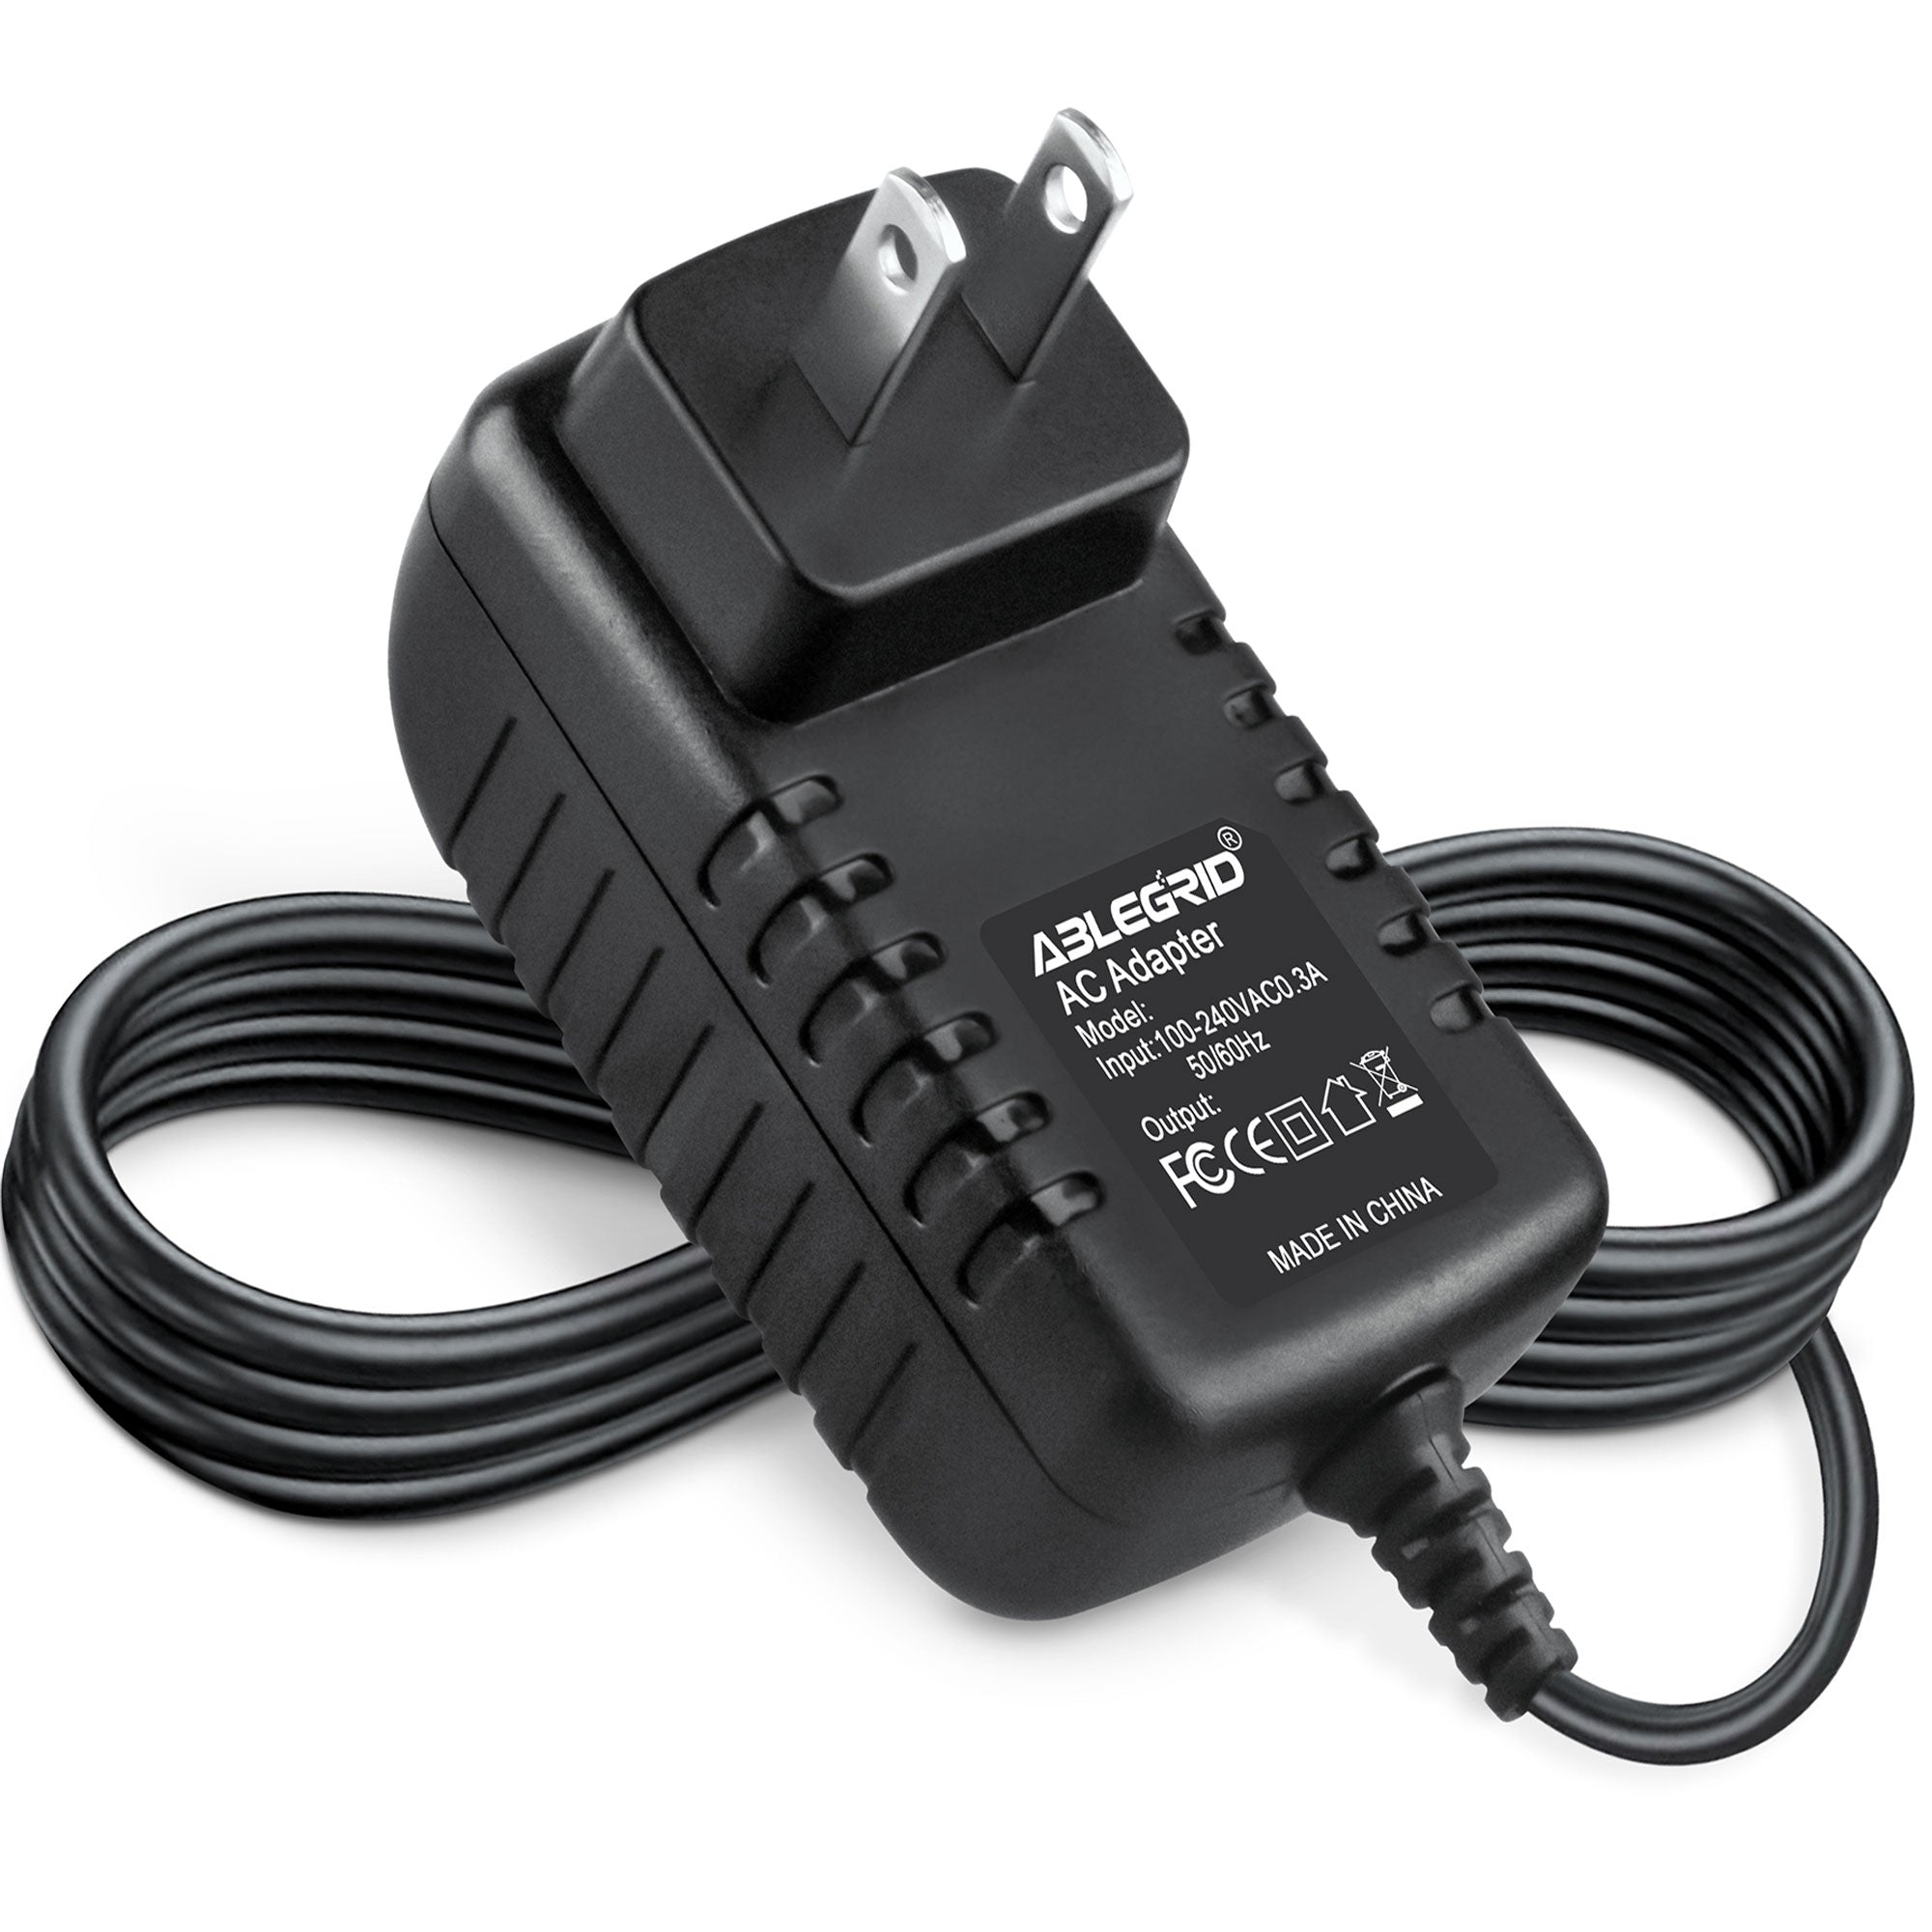 AbleGrid AC / DC Adapter for DynaVox Systems Inc. Model: HES24-12020 HES2412020 Power Supply Cord Cable Charger Input: 100V - 120V AC - 240 VAC 50/60Hz Worldwide Voltage Use Mains PSU